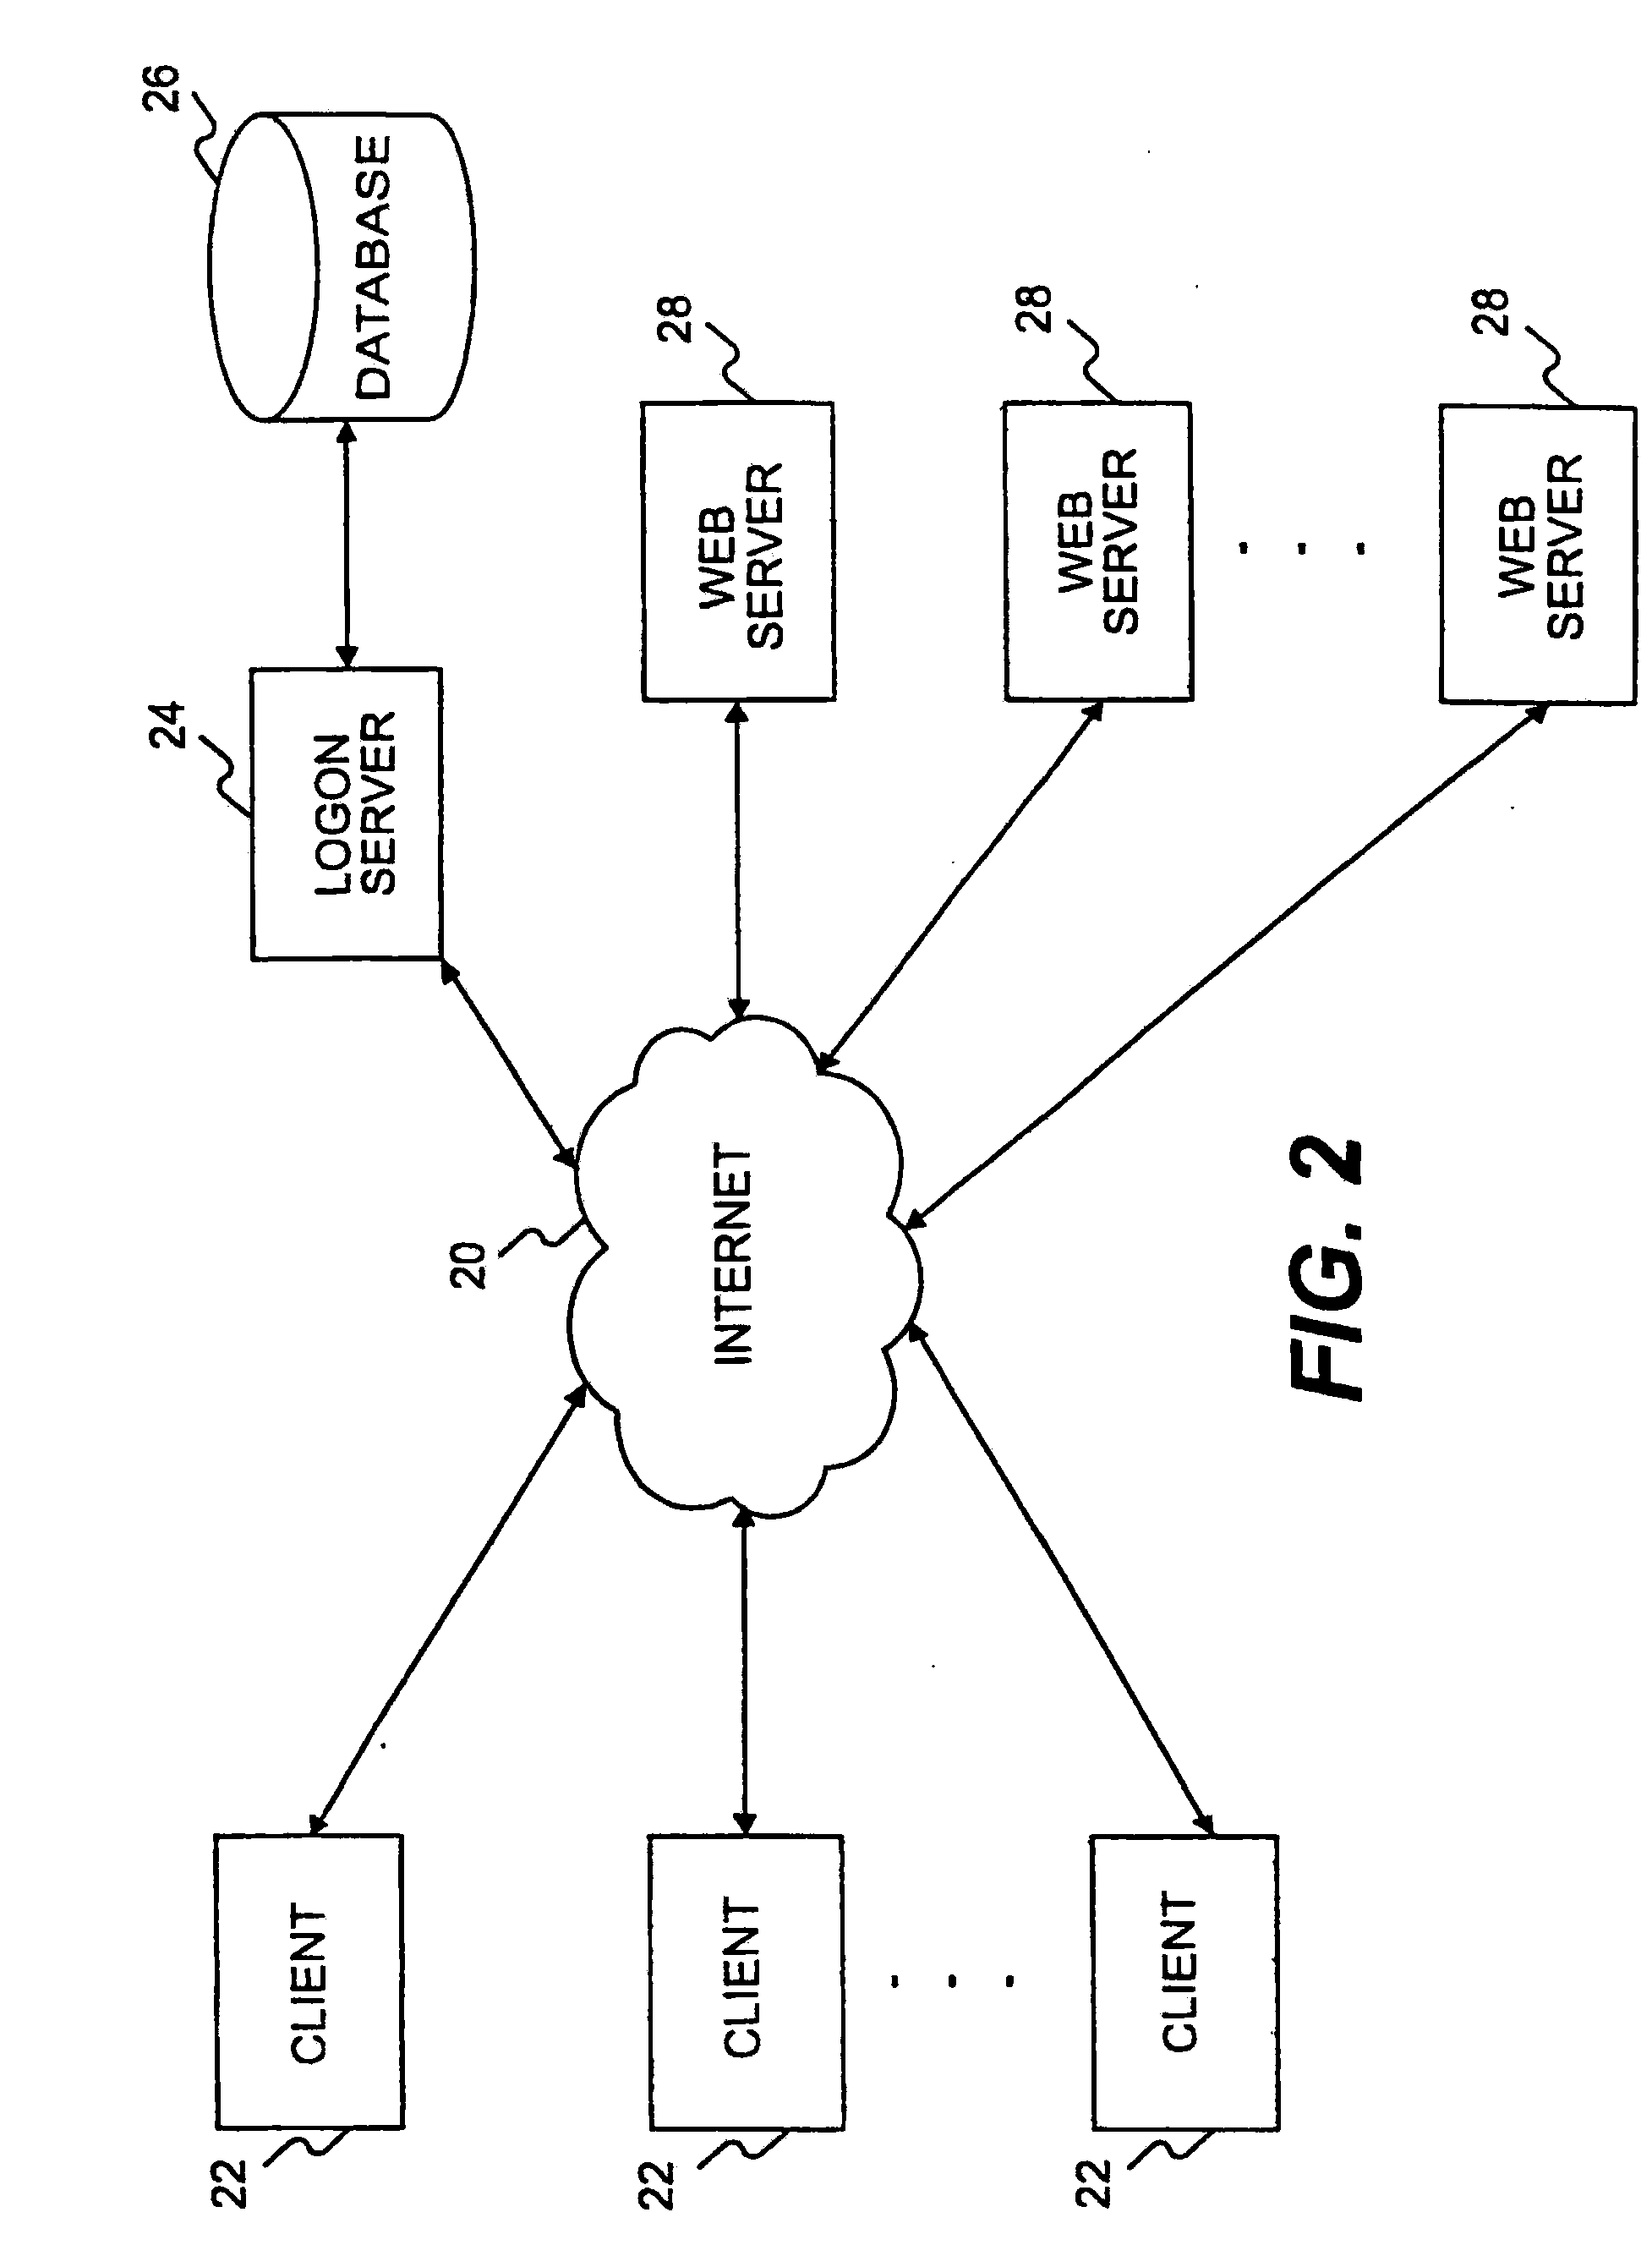 System and method for providing user authentication and identity management